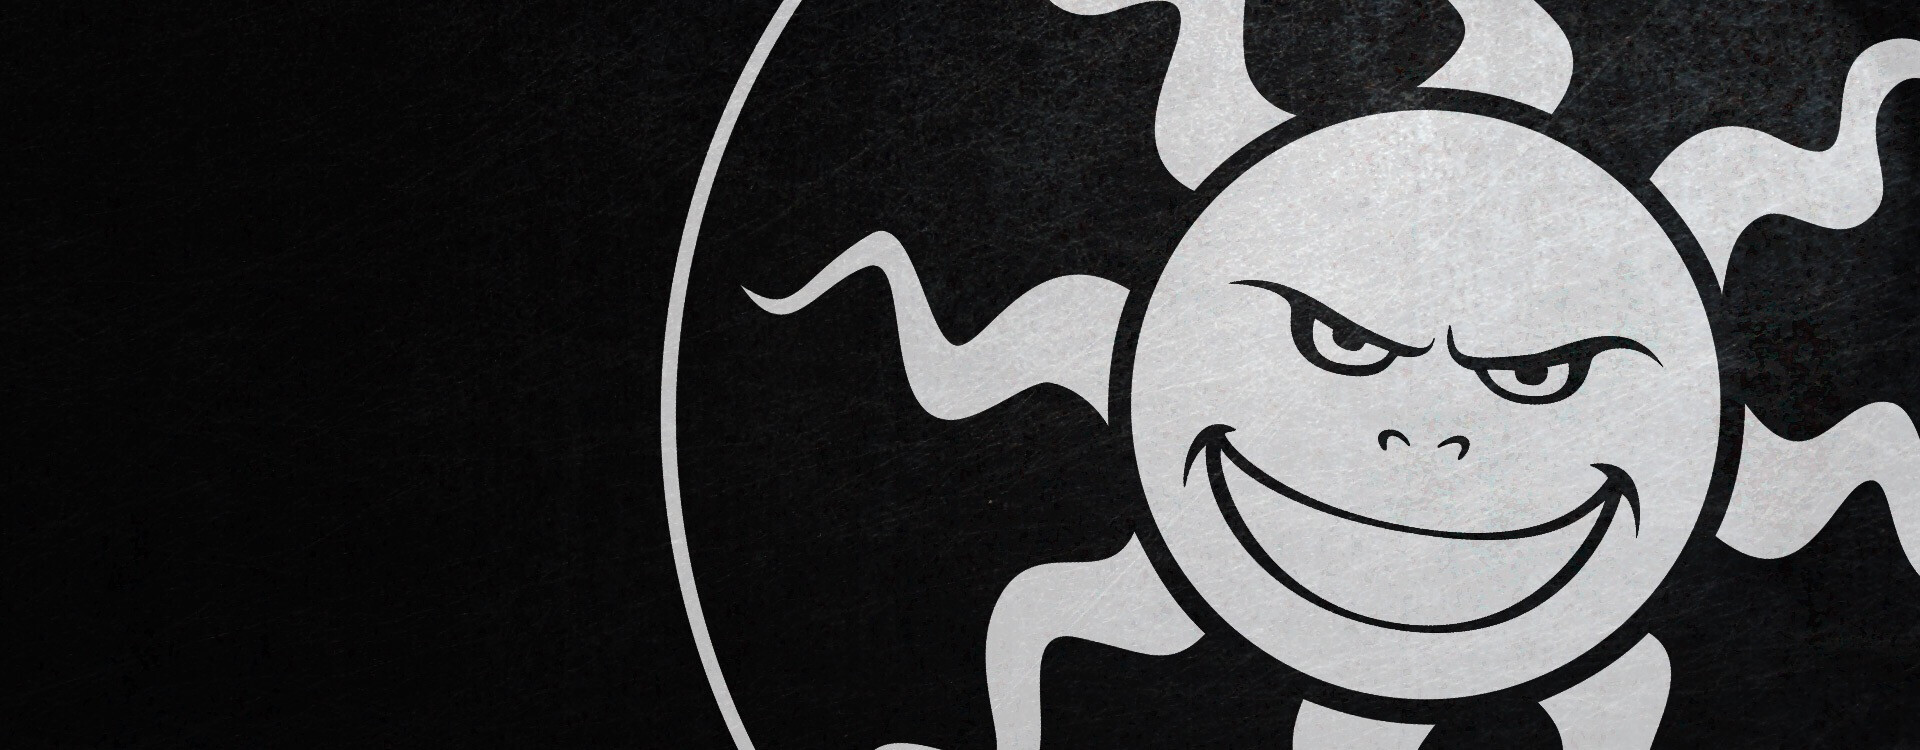 Starbreeze CEO Comments on Payday 3 Server Issues